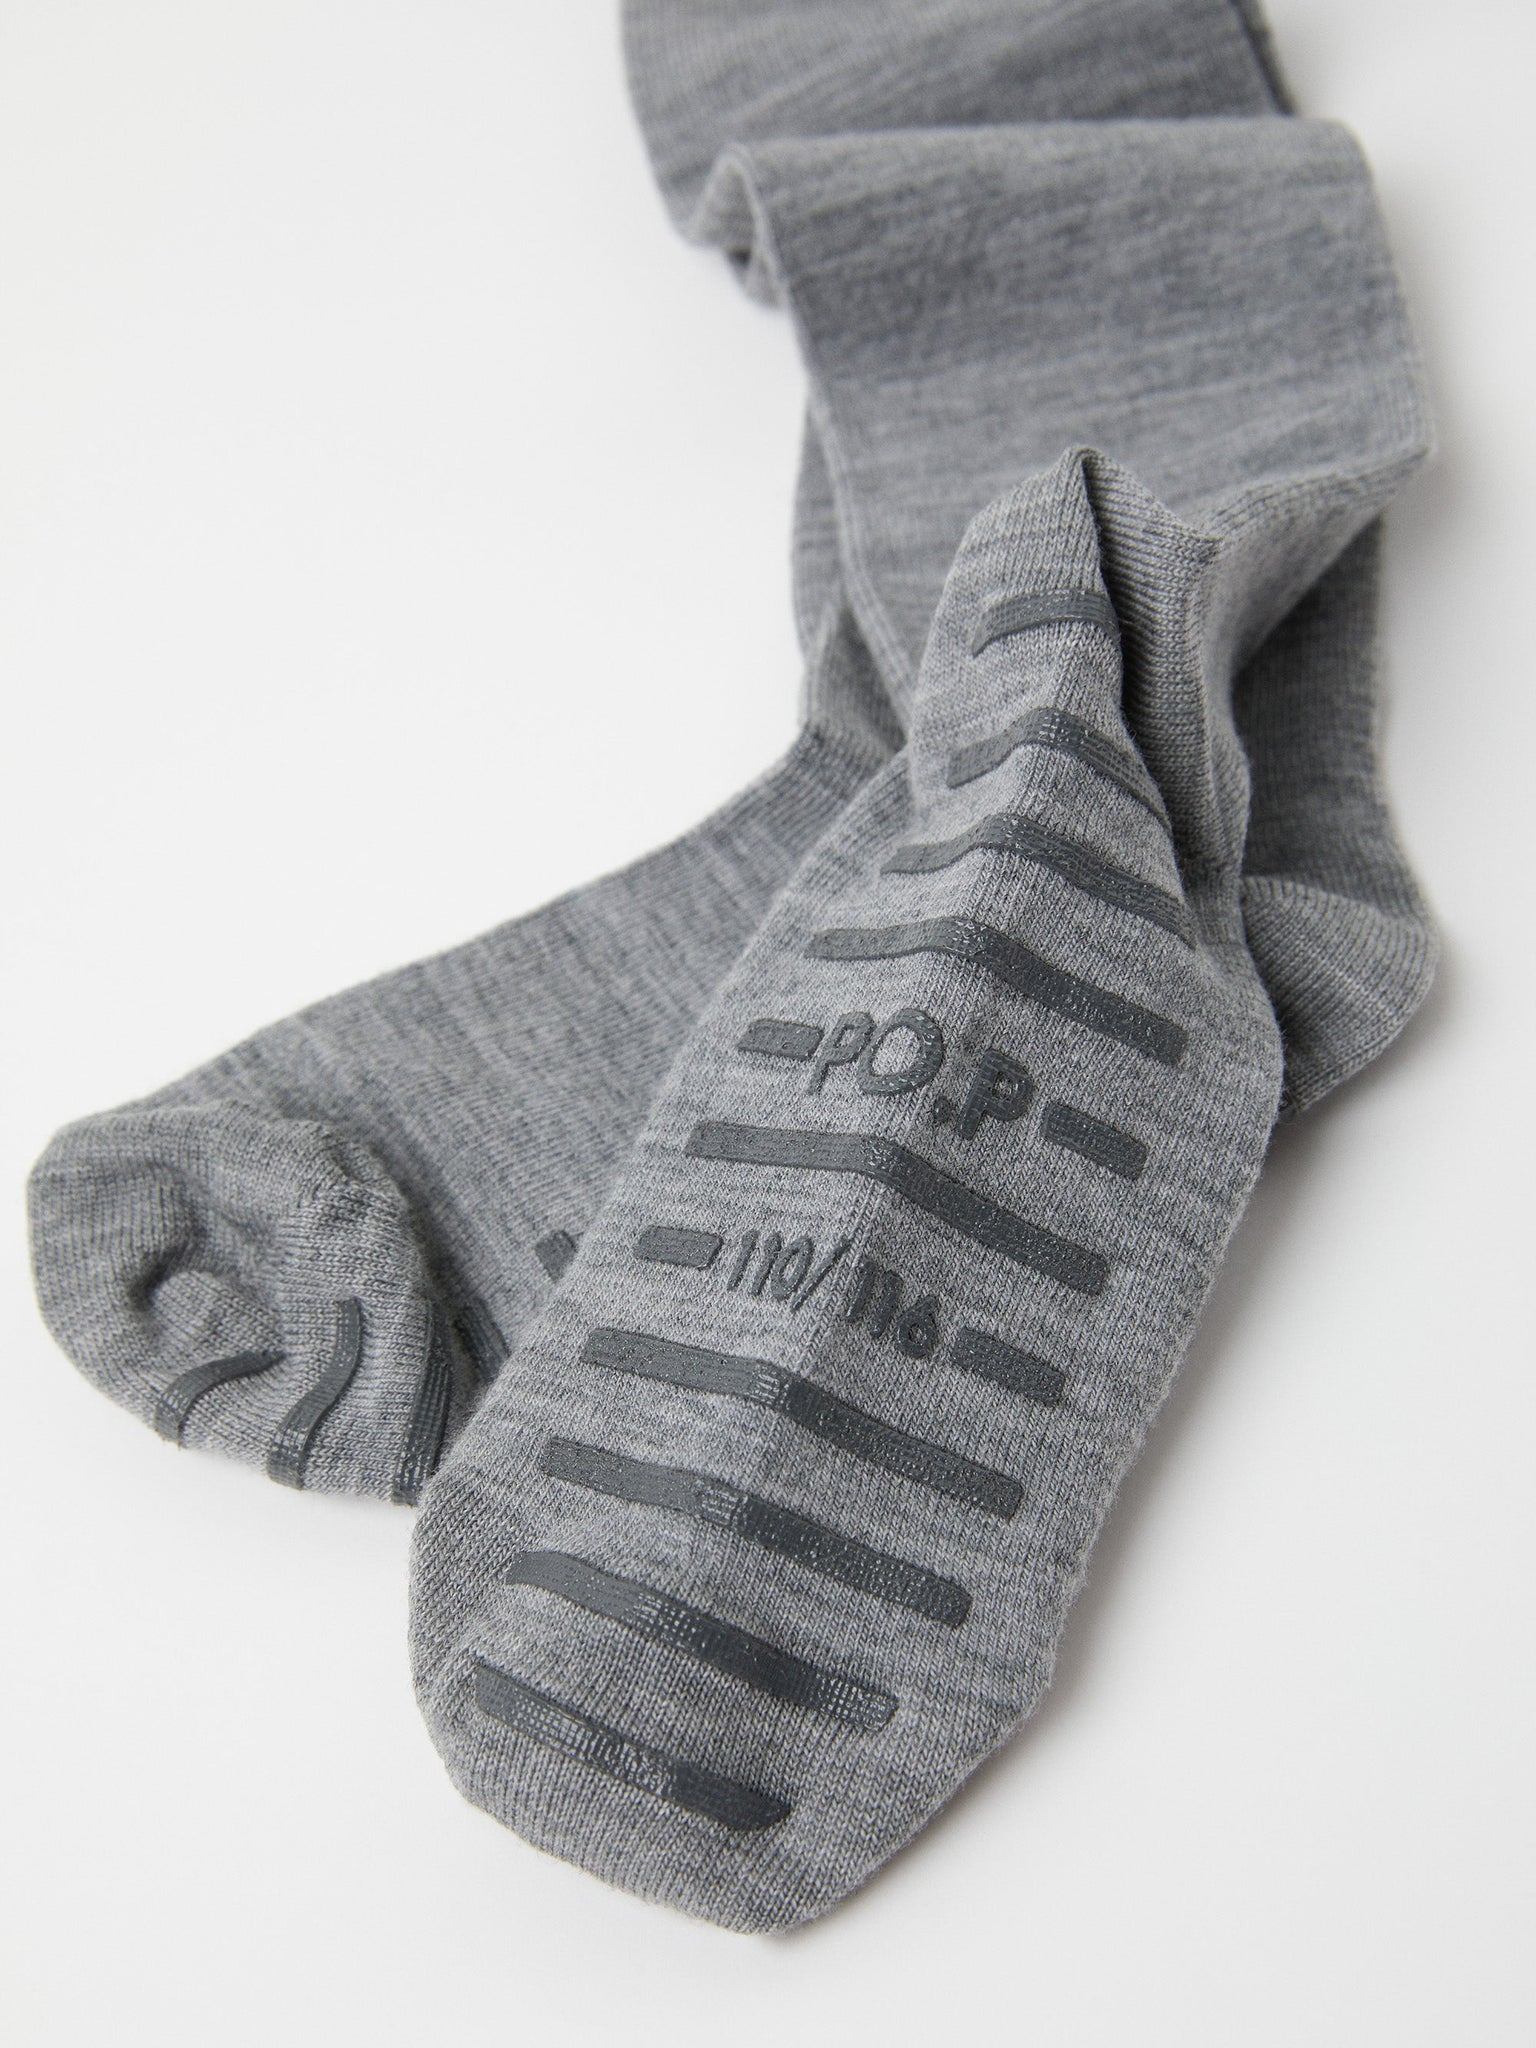 Merino Wool Grey Antislip Kids Tights from the Polarn O. Pyret kidswear collection. Ethically produced kids clothing.